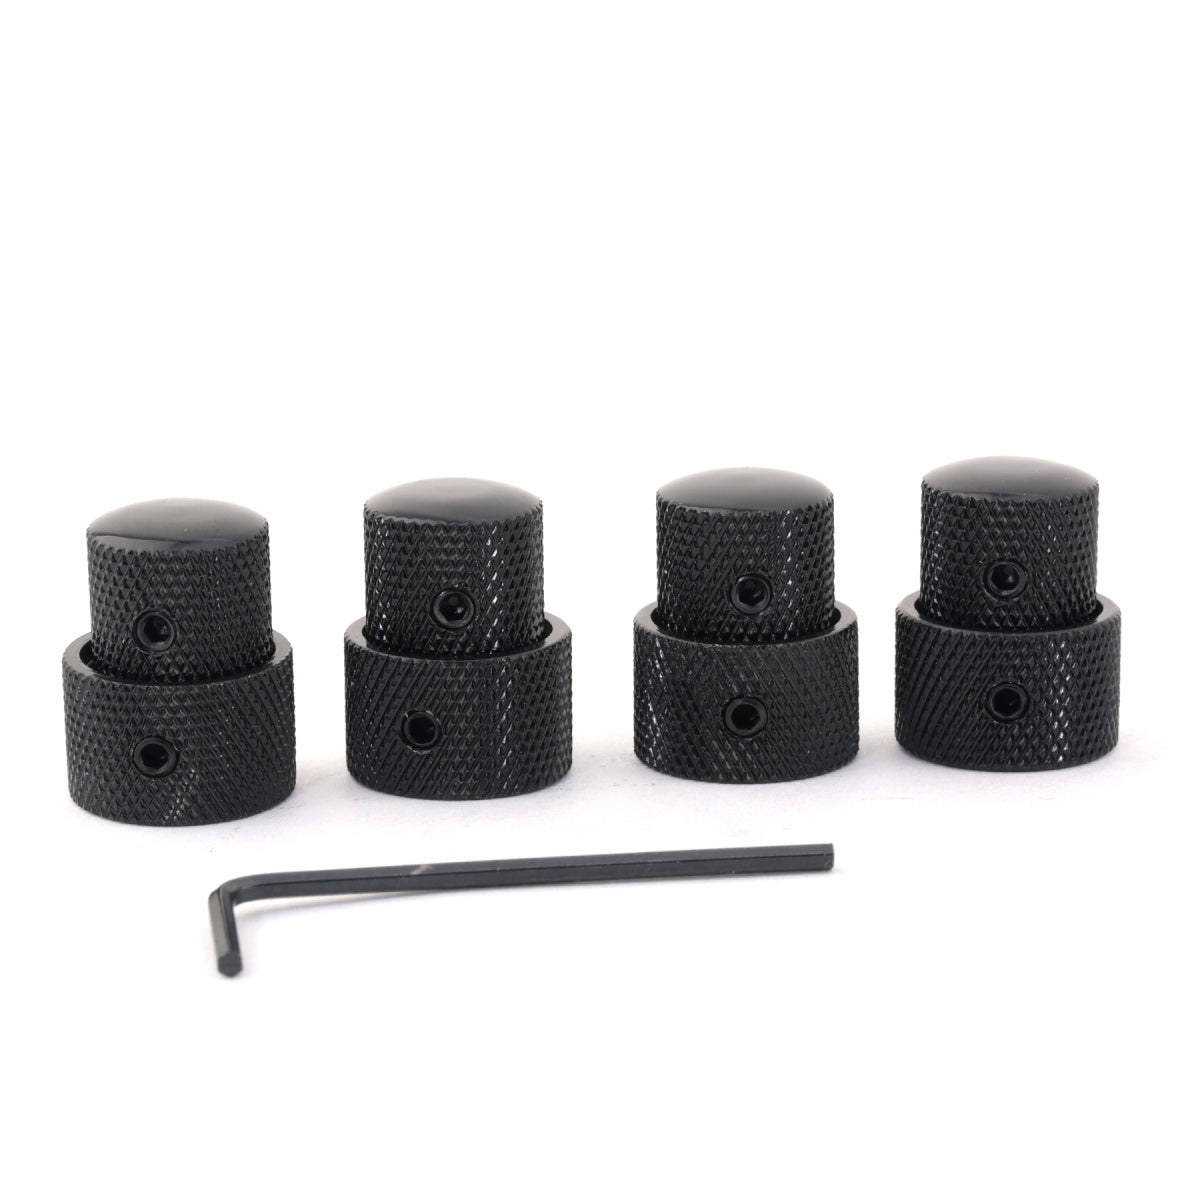 Musiclily Metal Electric Guitar Dual Concentric Stacked Knobs Set, Black (4 Pieces)